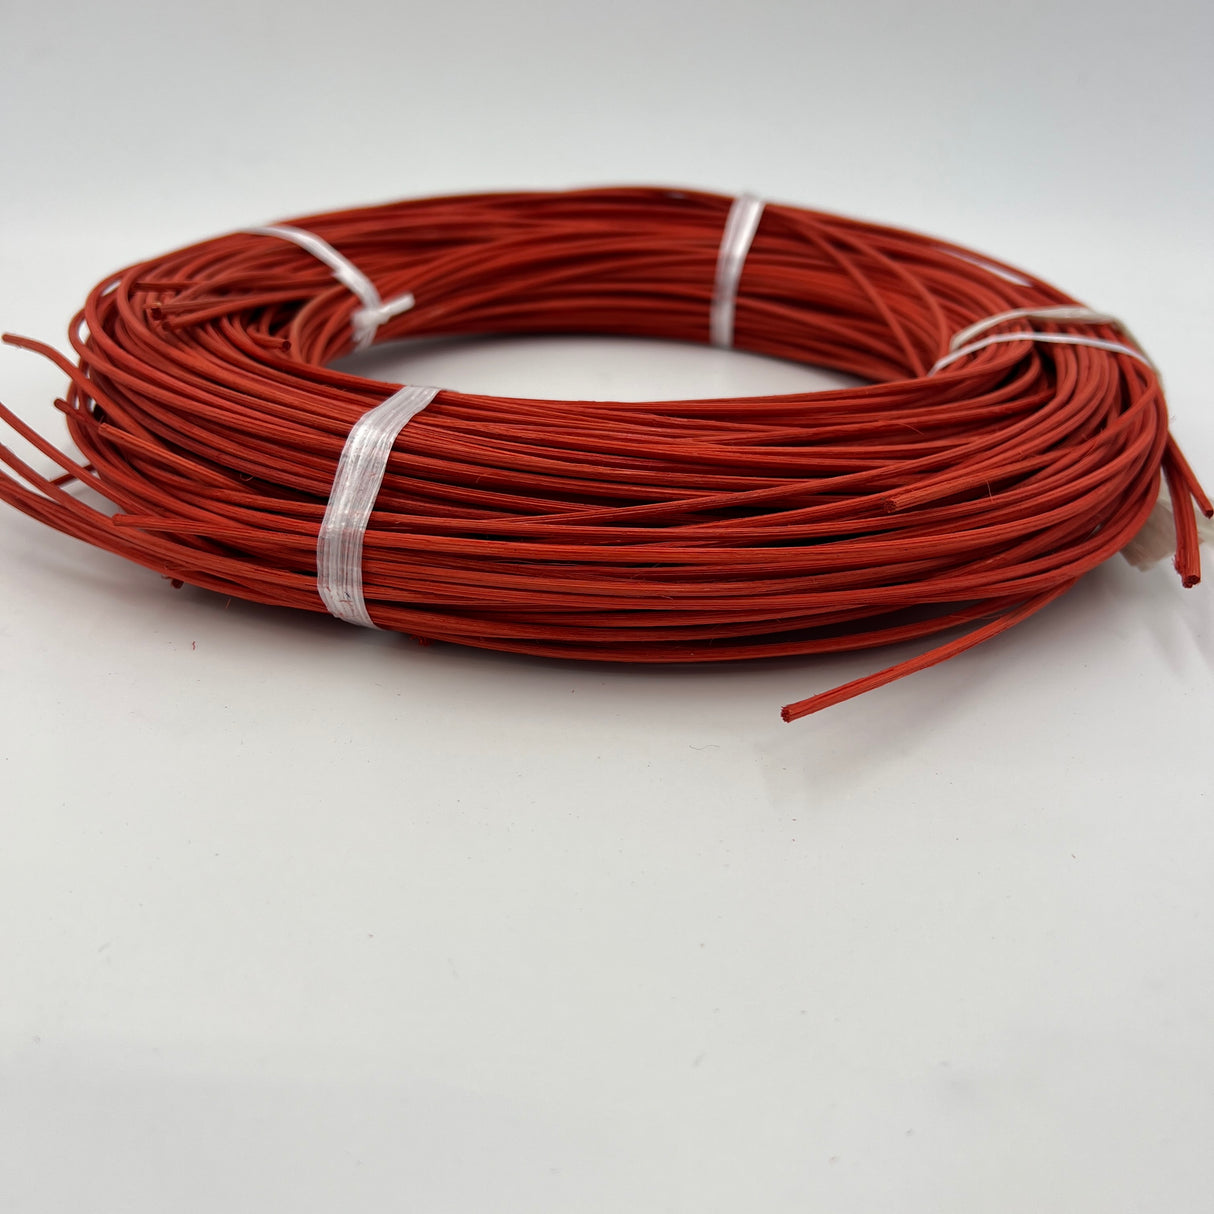 Paprika - #3 Round - Dyed Reed (1/2 lb coil)